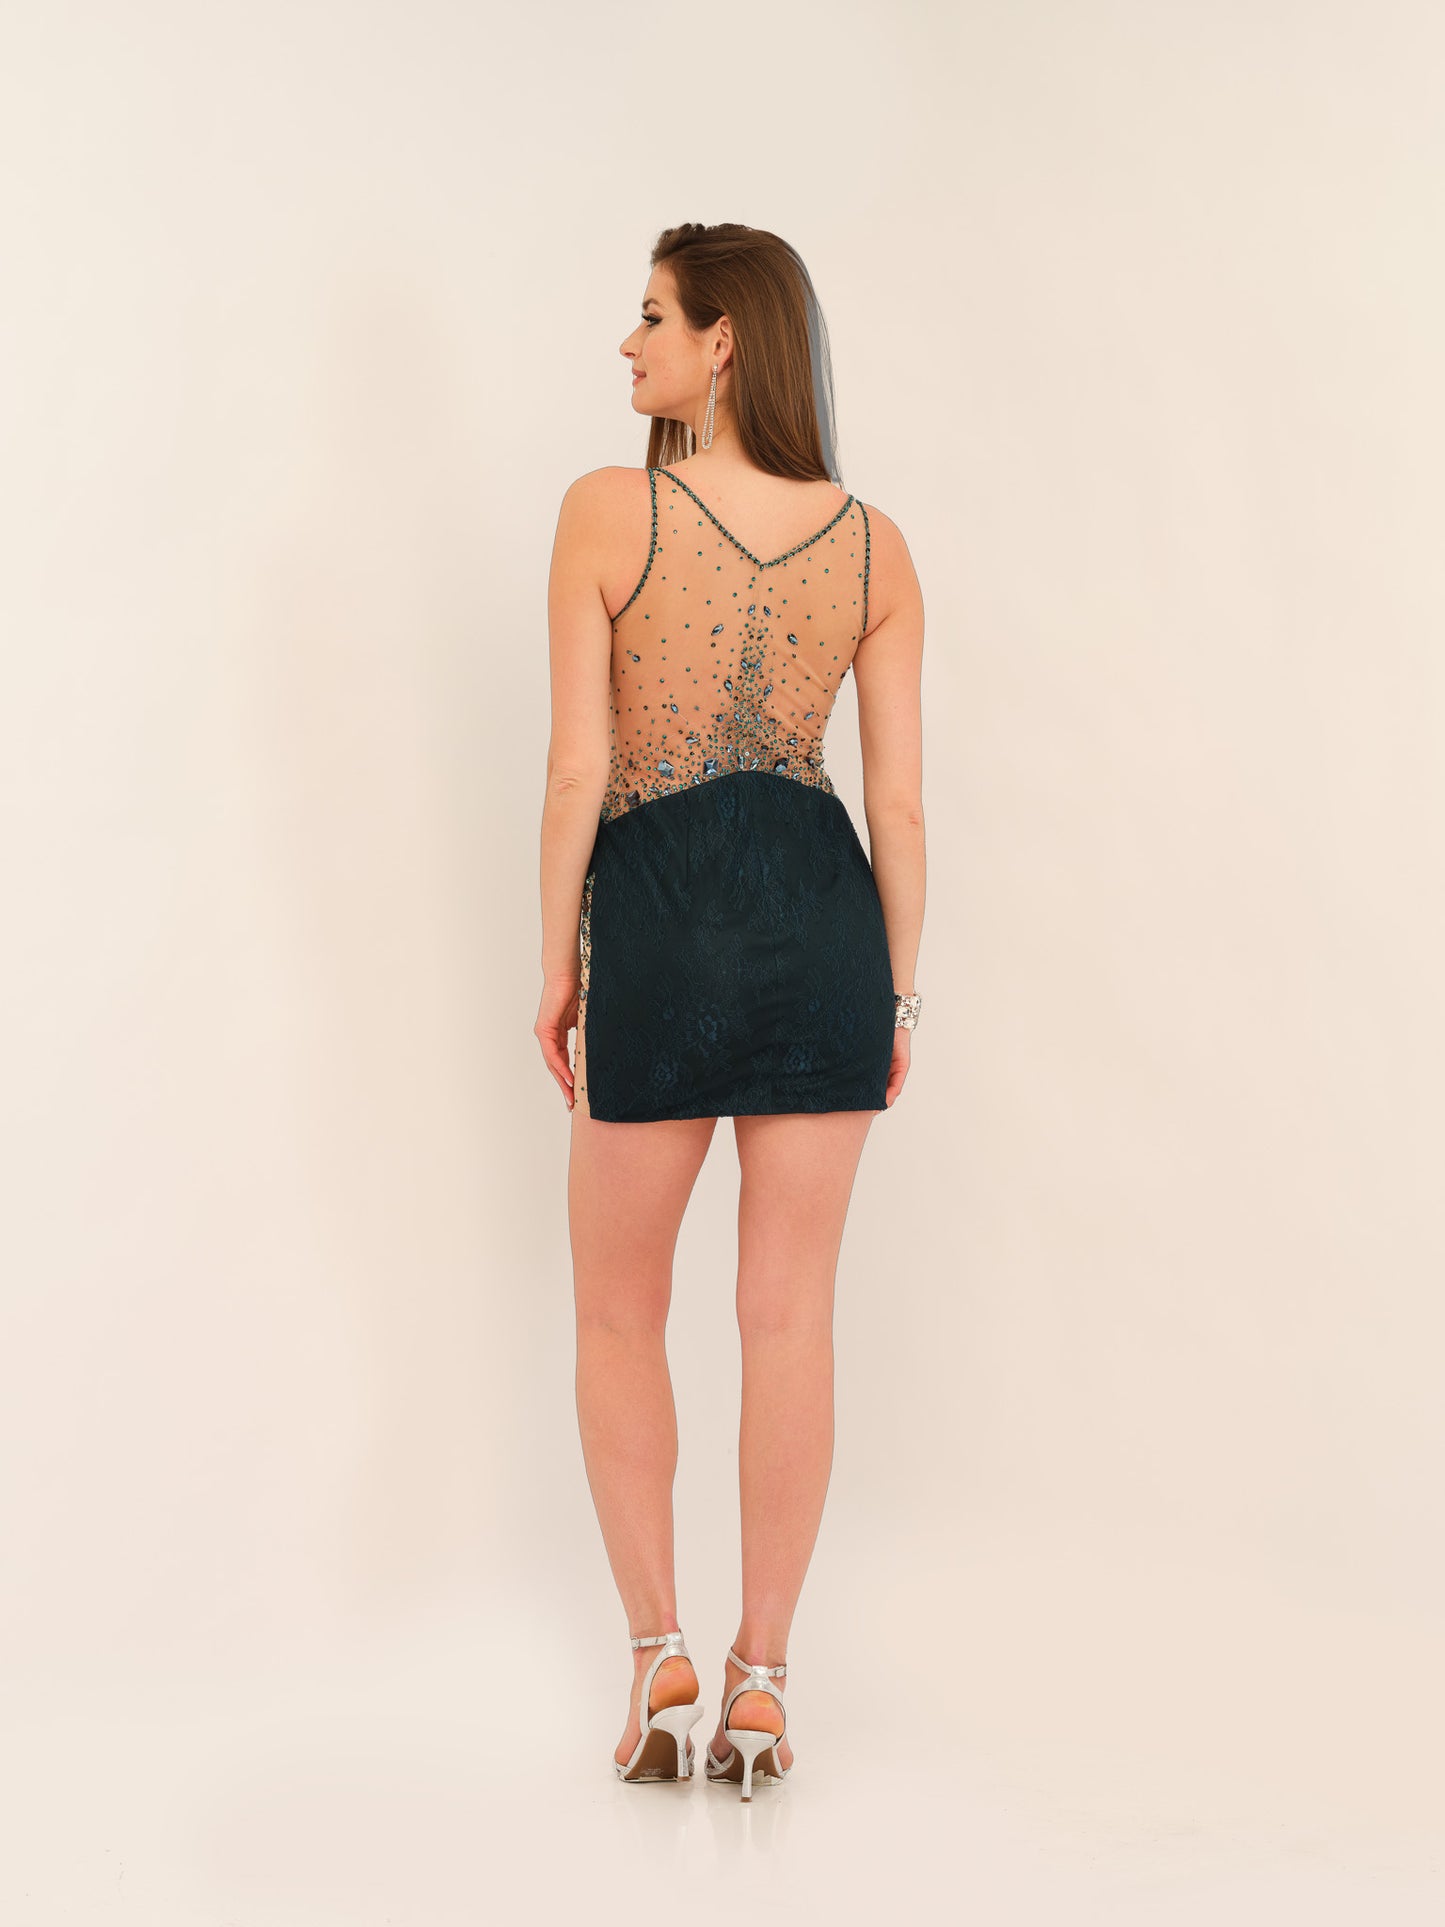 LACE OVERLAY BACKLESS BEJEWELED MINI DRESS